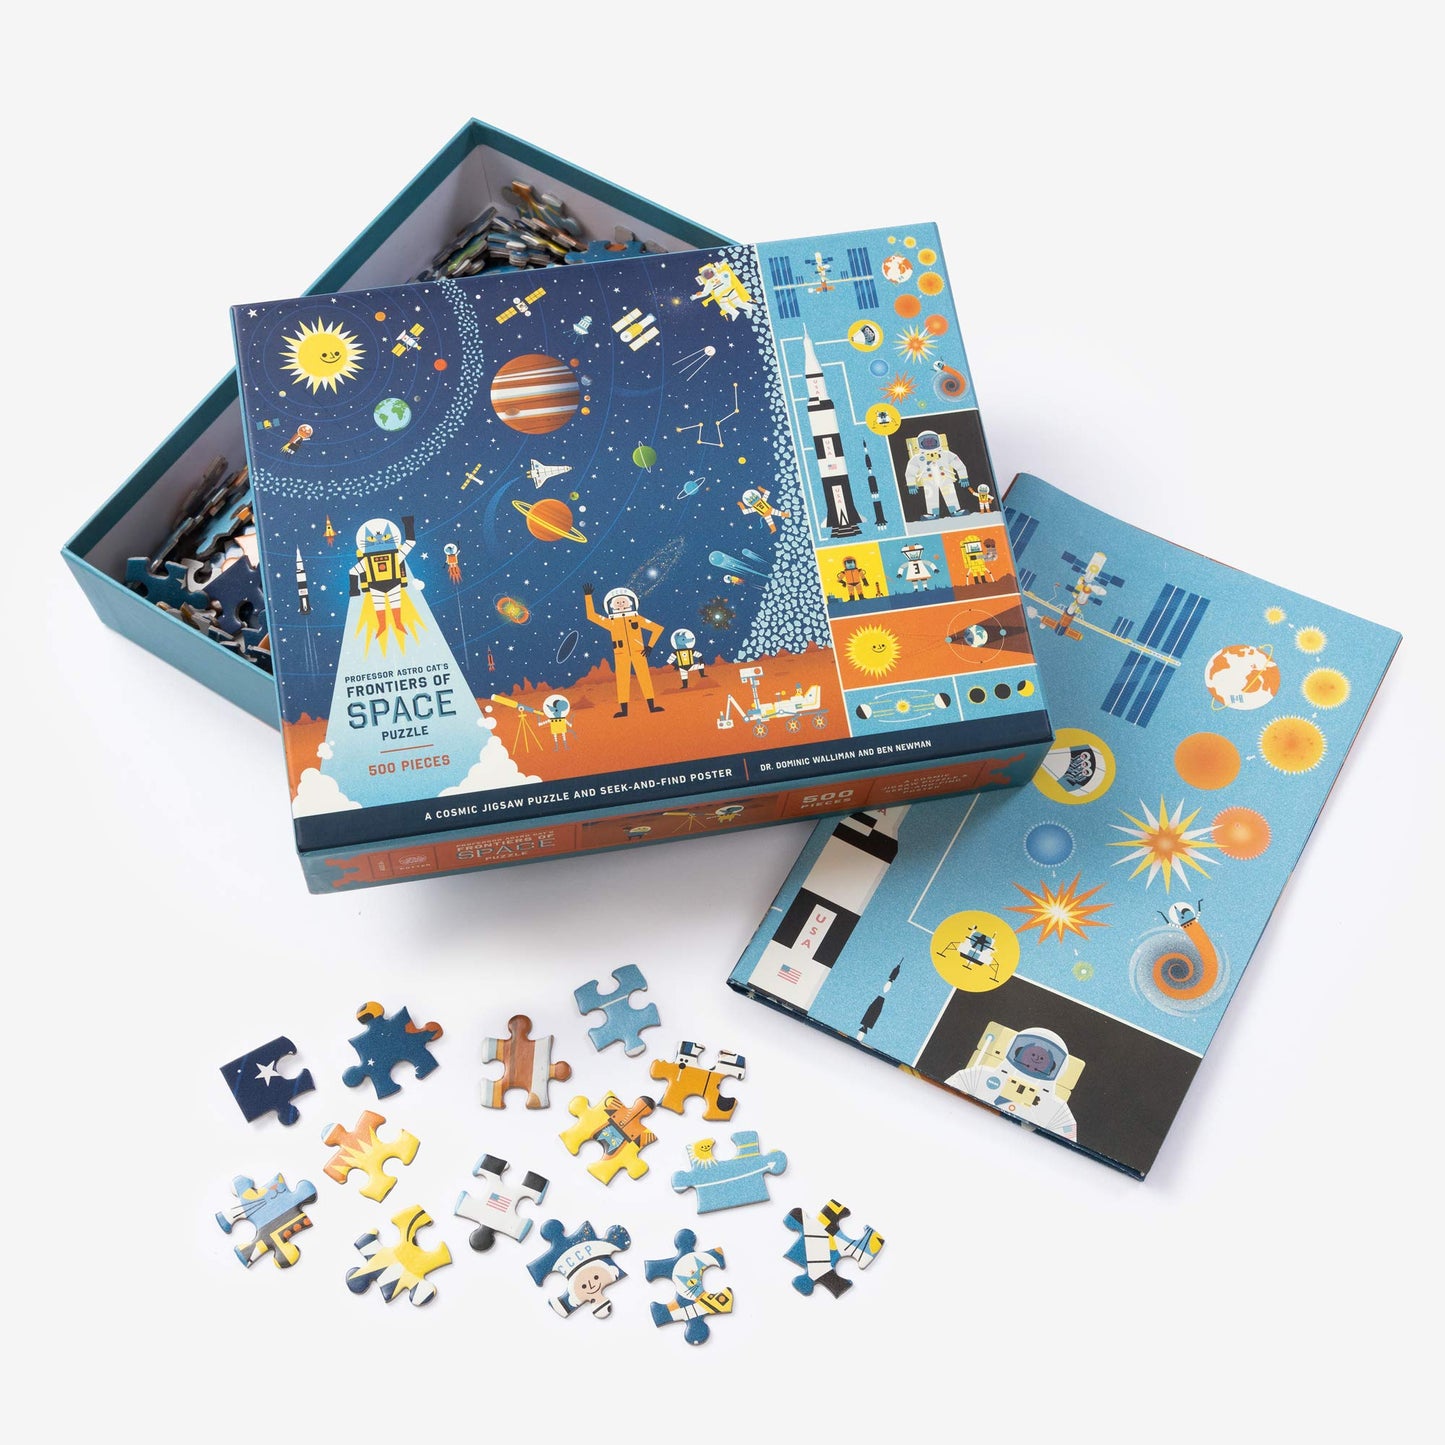 Professor Astro Cat's Frontiers of Space 500 Piece Jigsaw Puzzle